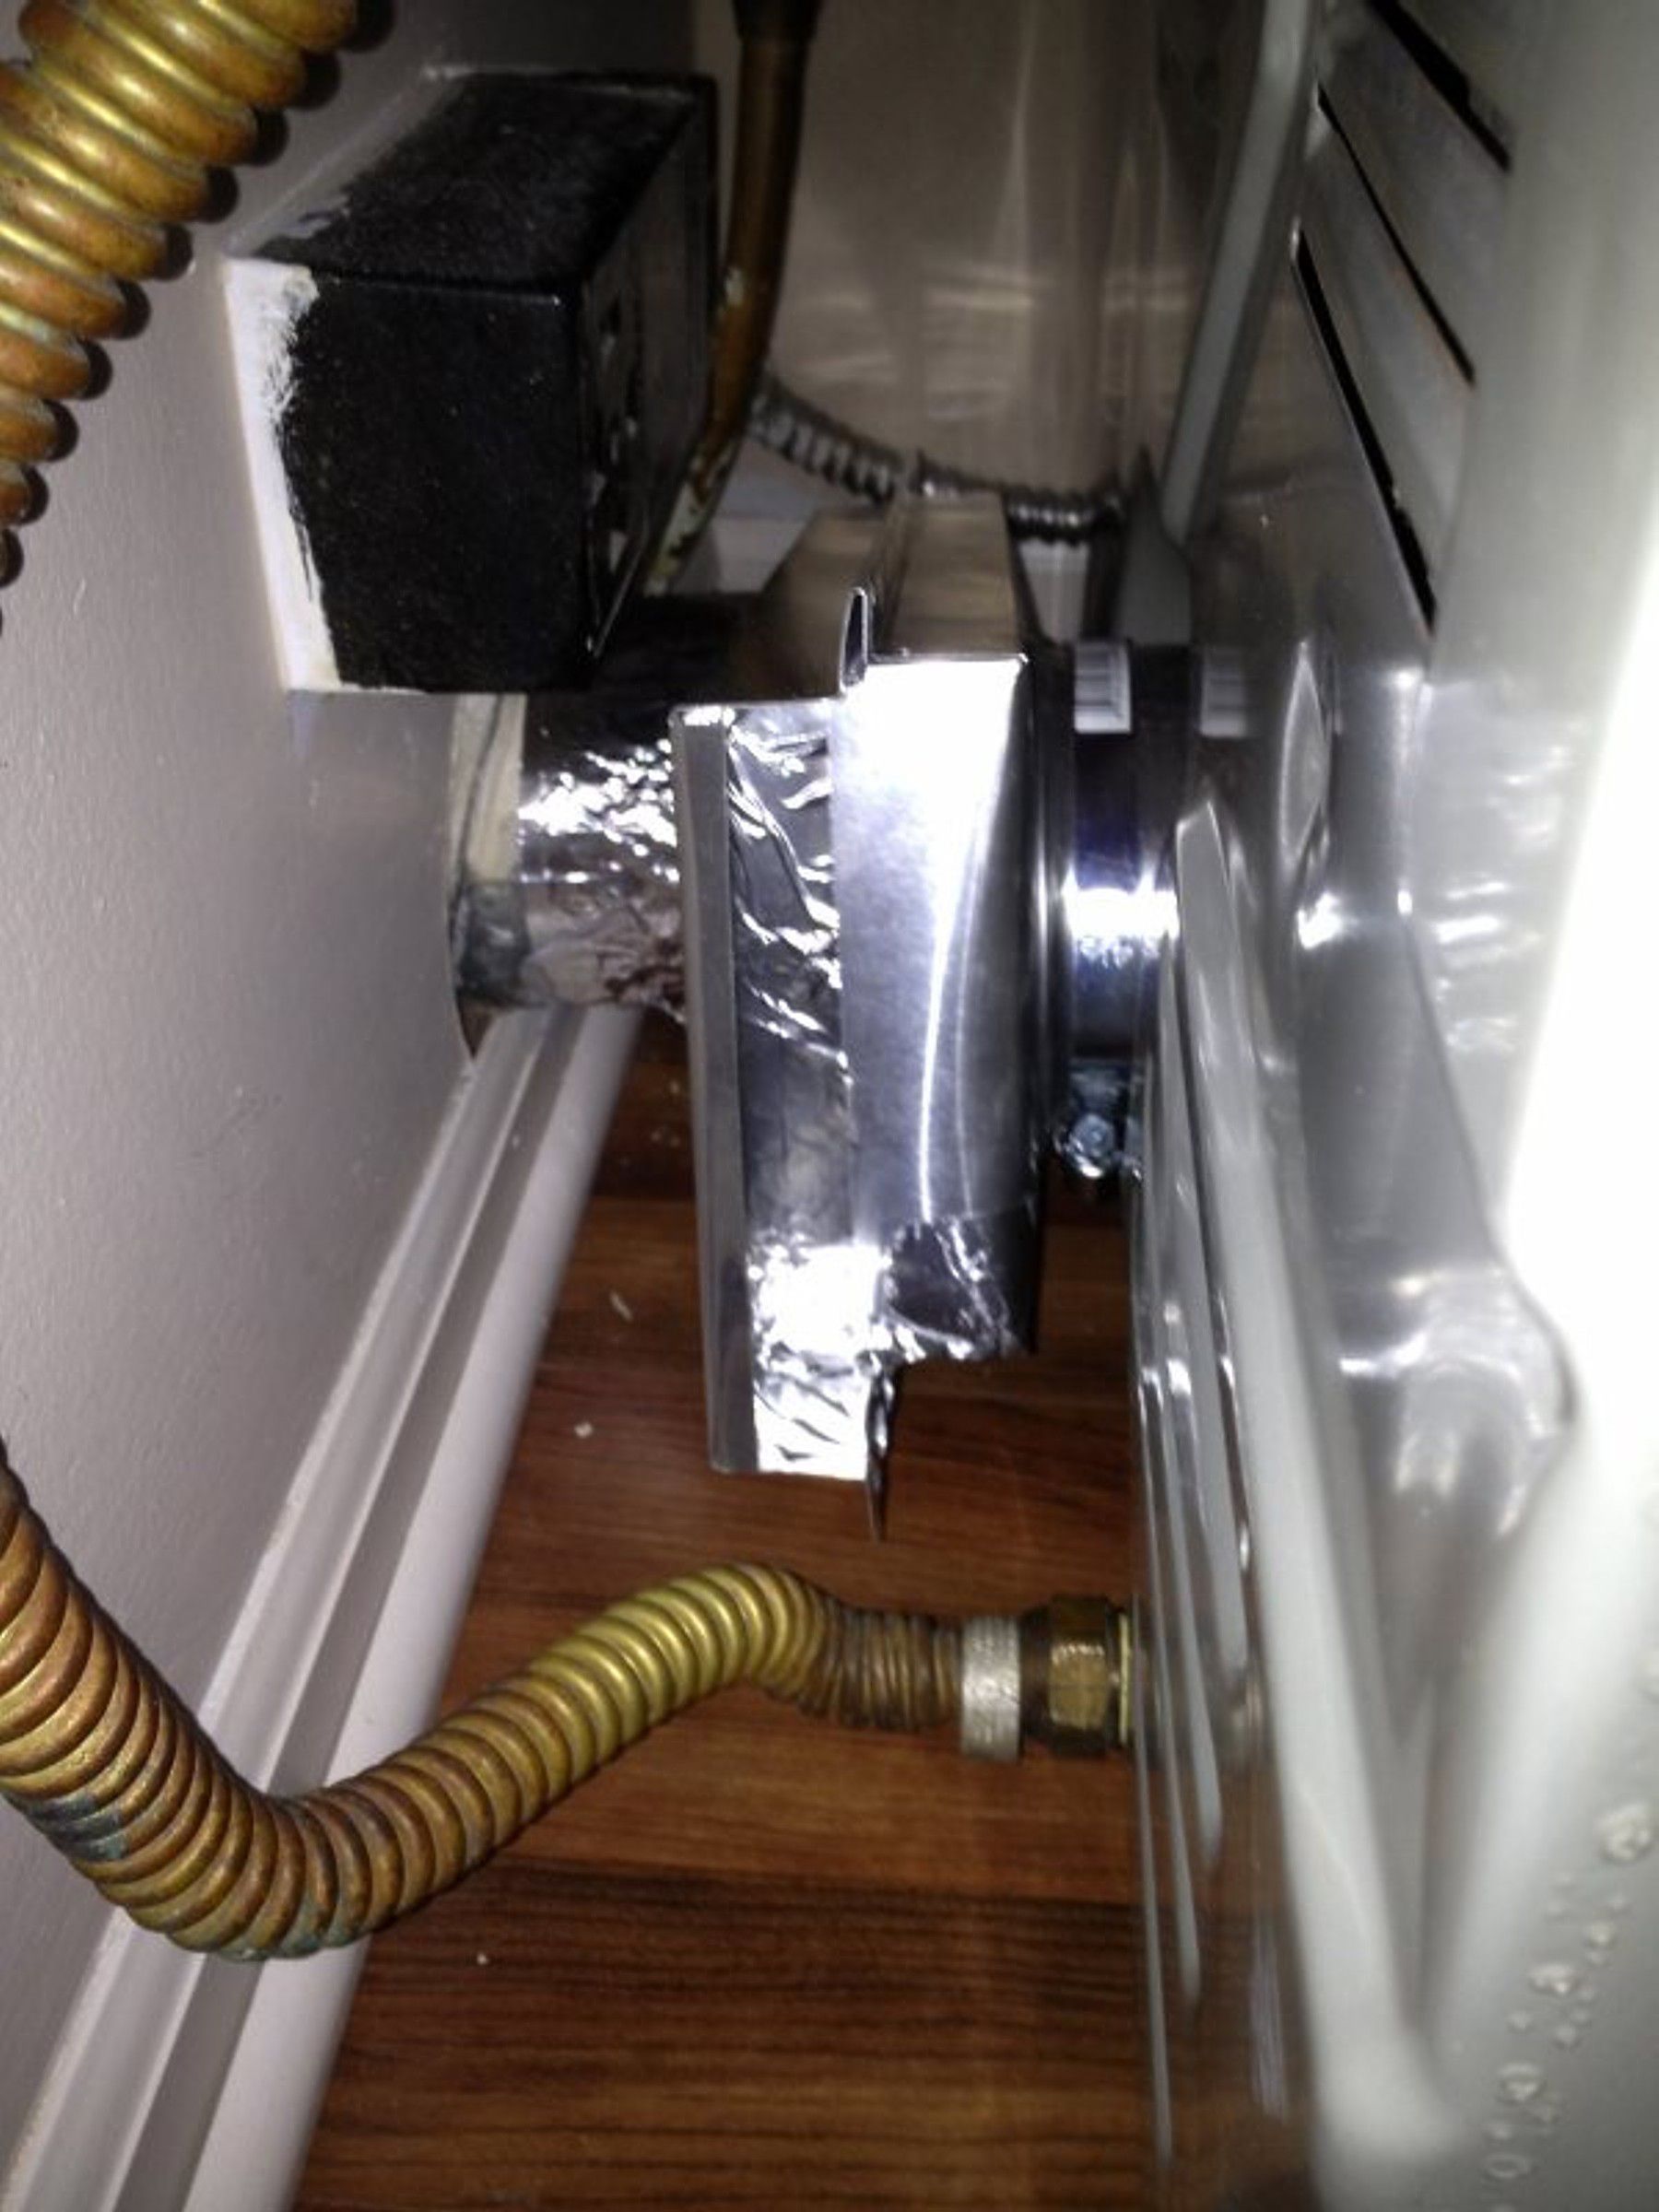 How To Hook Up A Dryer Vent In A Tight Space